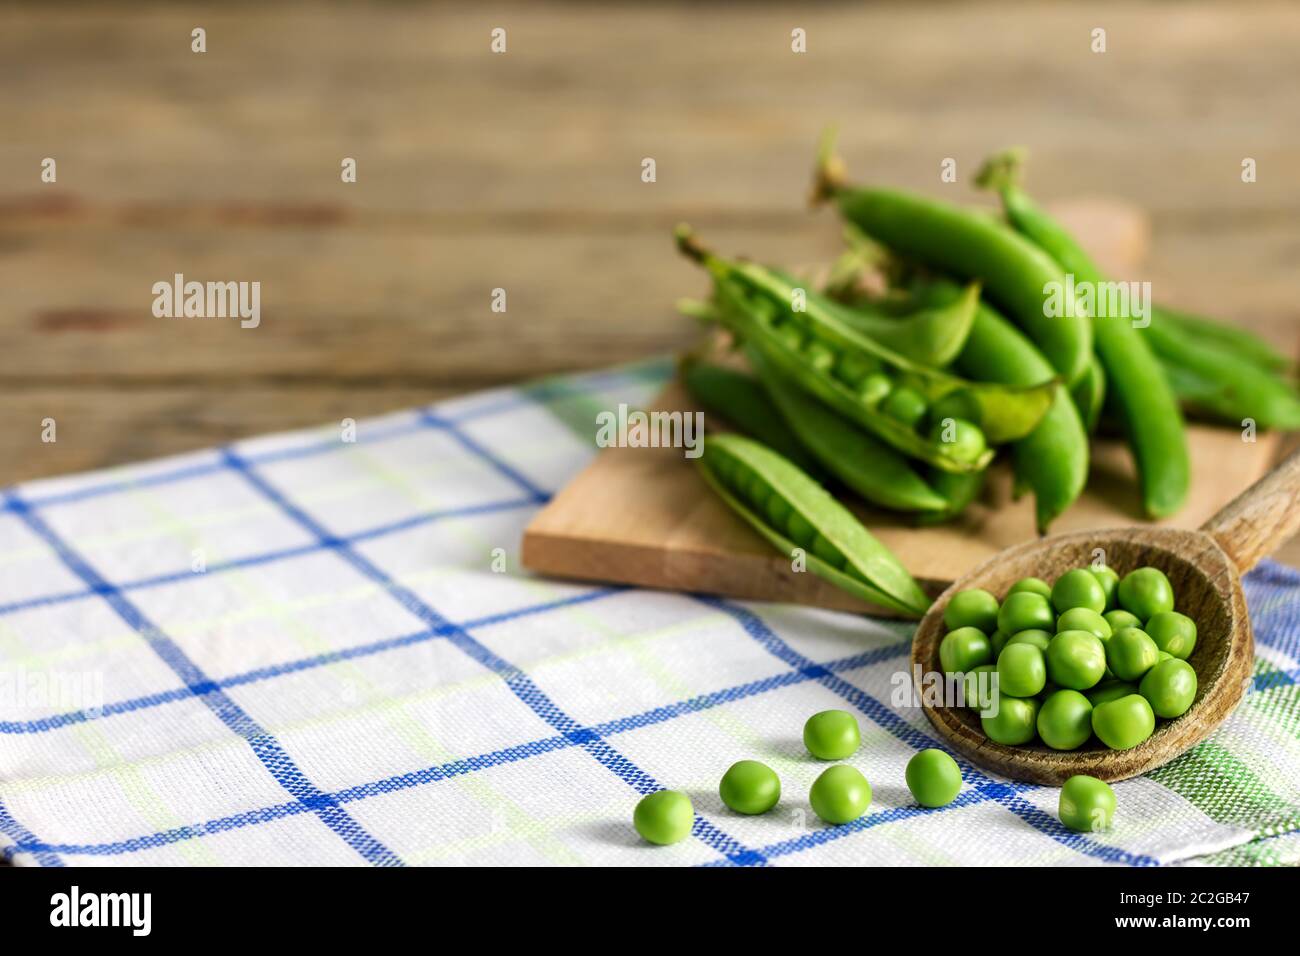 Fresh green peas on a wooden ladle and peas in pods on a kitchen cloth with copy space for text. Stock Photo